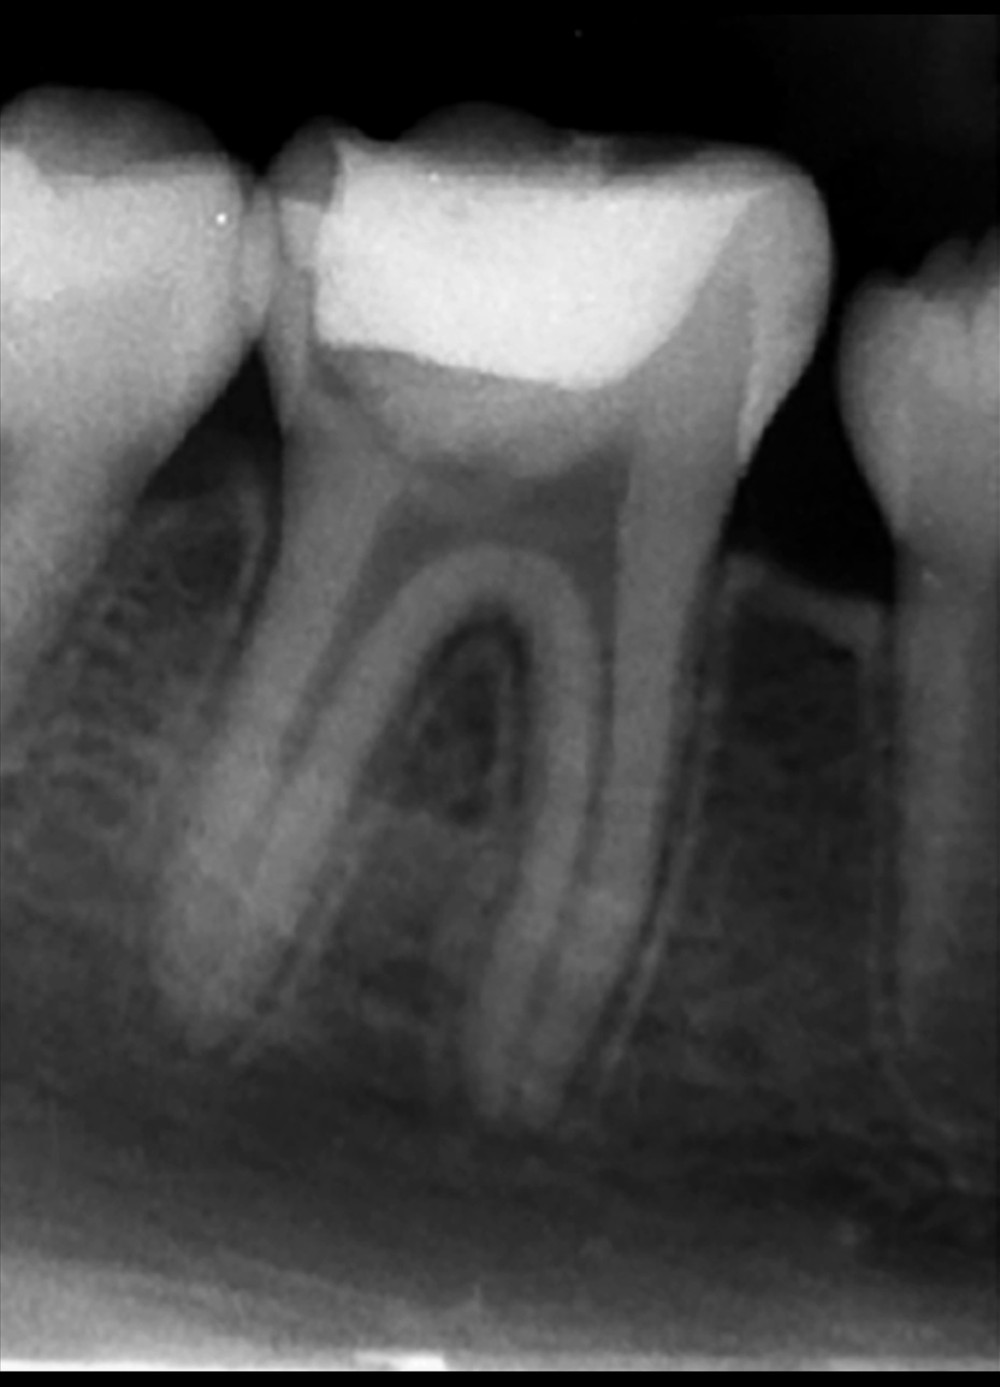 At 6 months after the procedure, an intraoral periapical radiograph revealed normal bone features with complete periapical pathology healing and development of intact lamina dura around the mesial and distal roots.